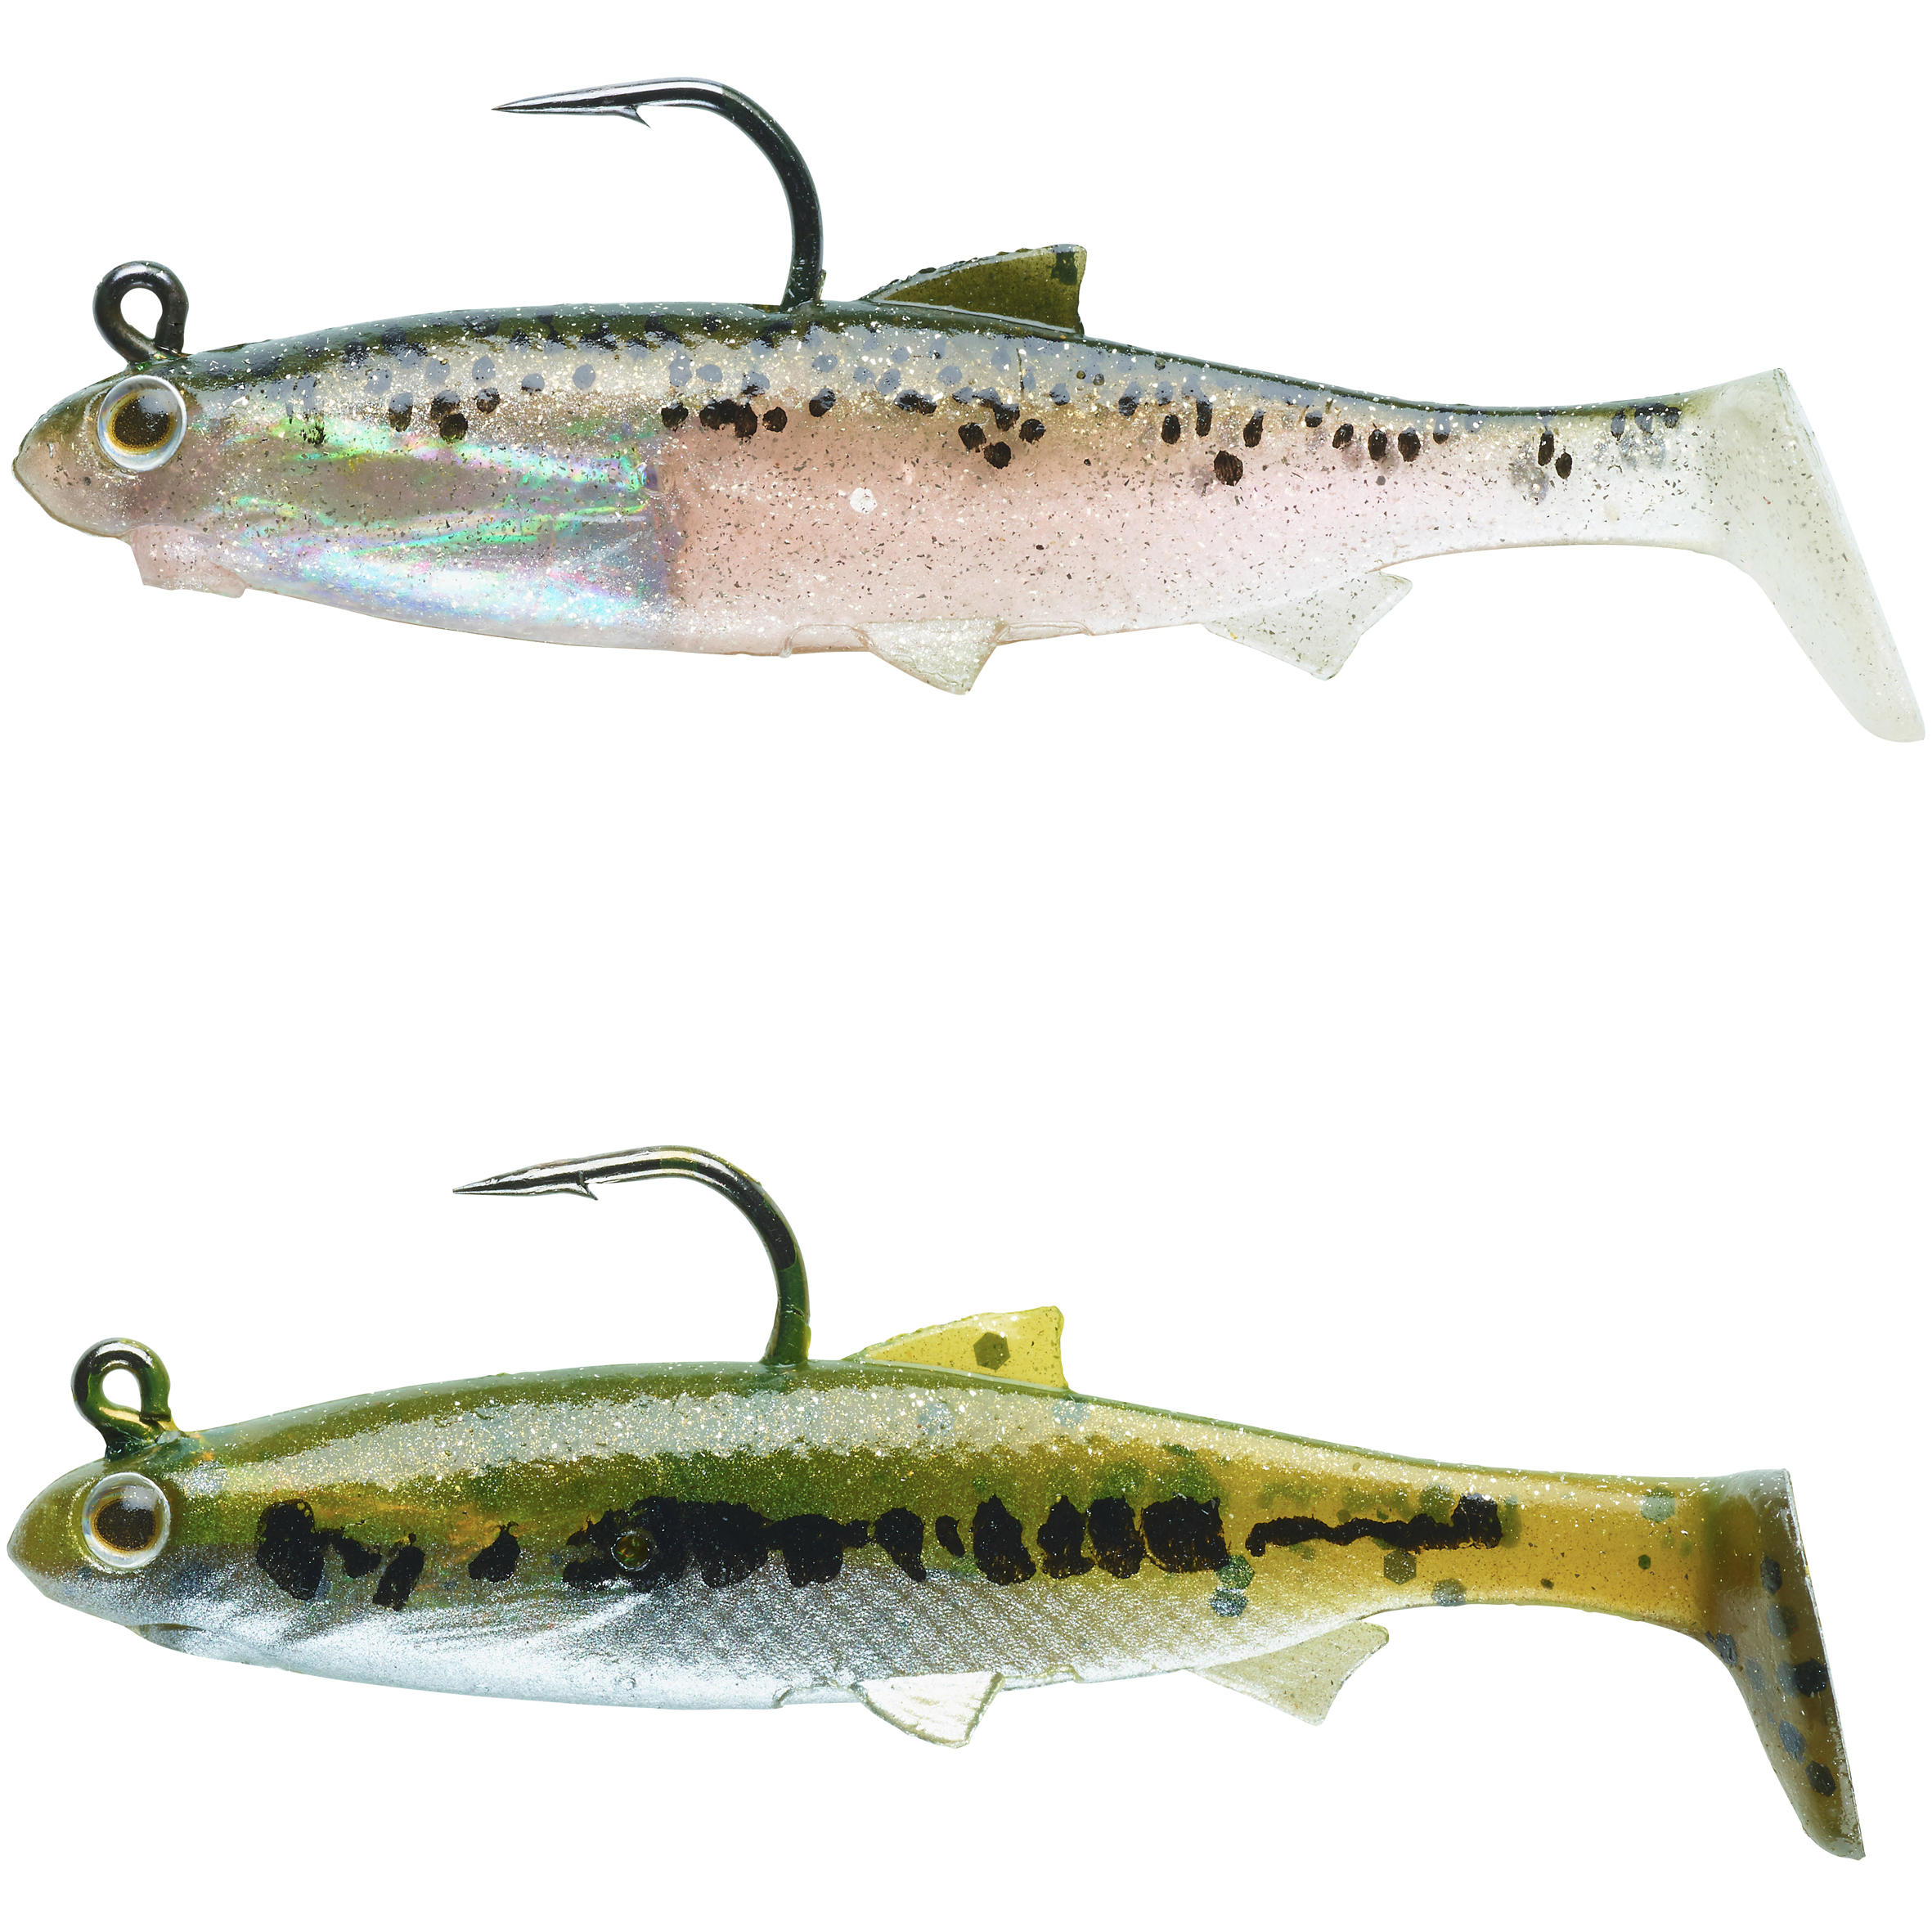 LURE FISHING SHAD SOFT LURE ROACH RTC 60 TROUT/MINNOW - Light grey